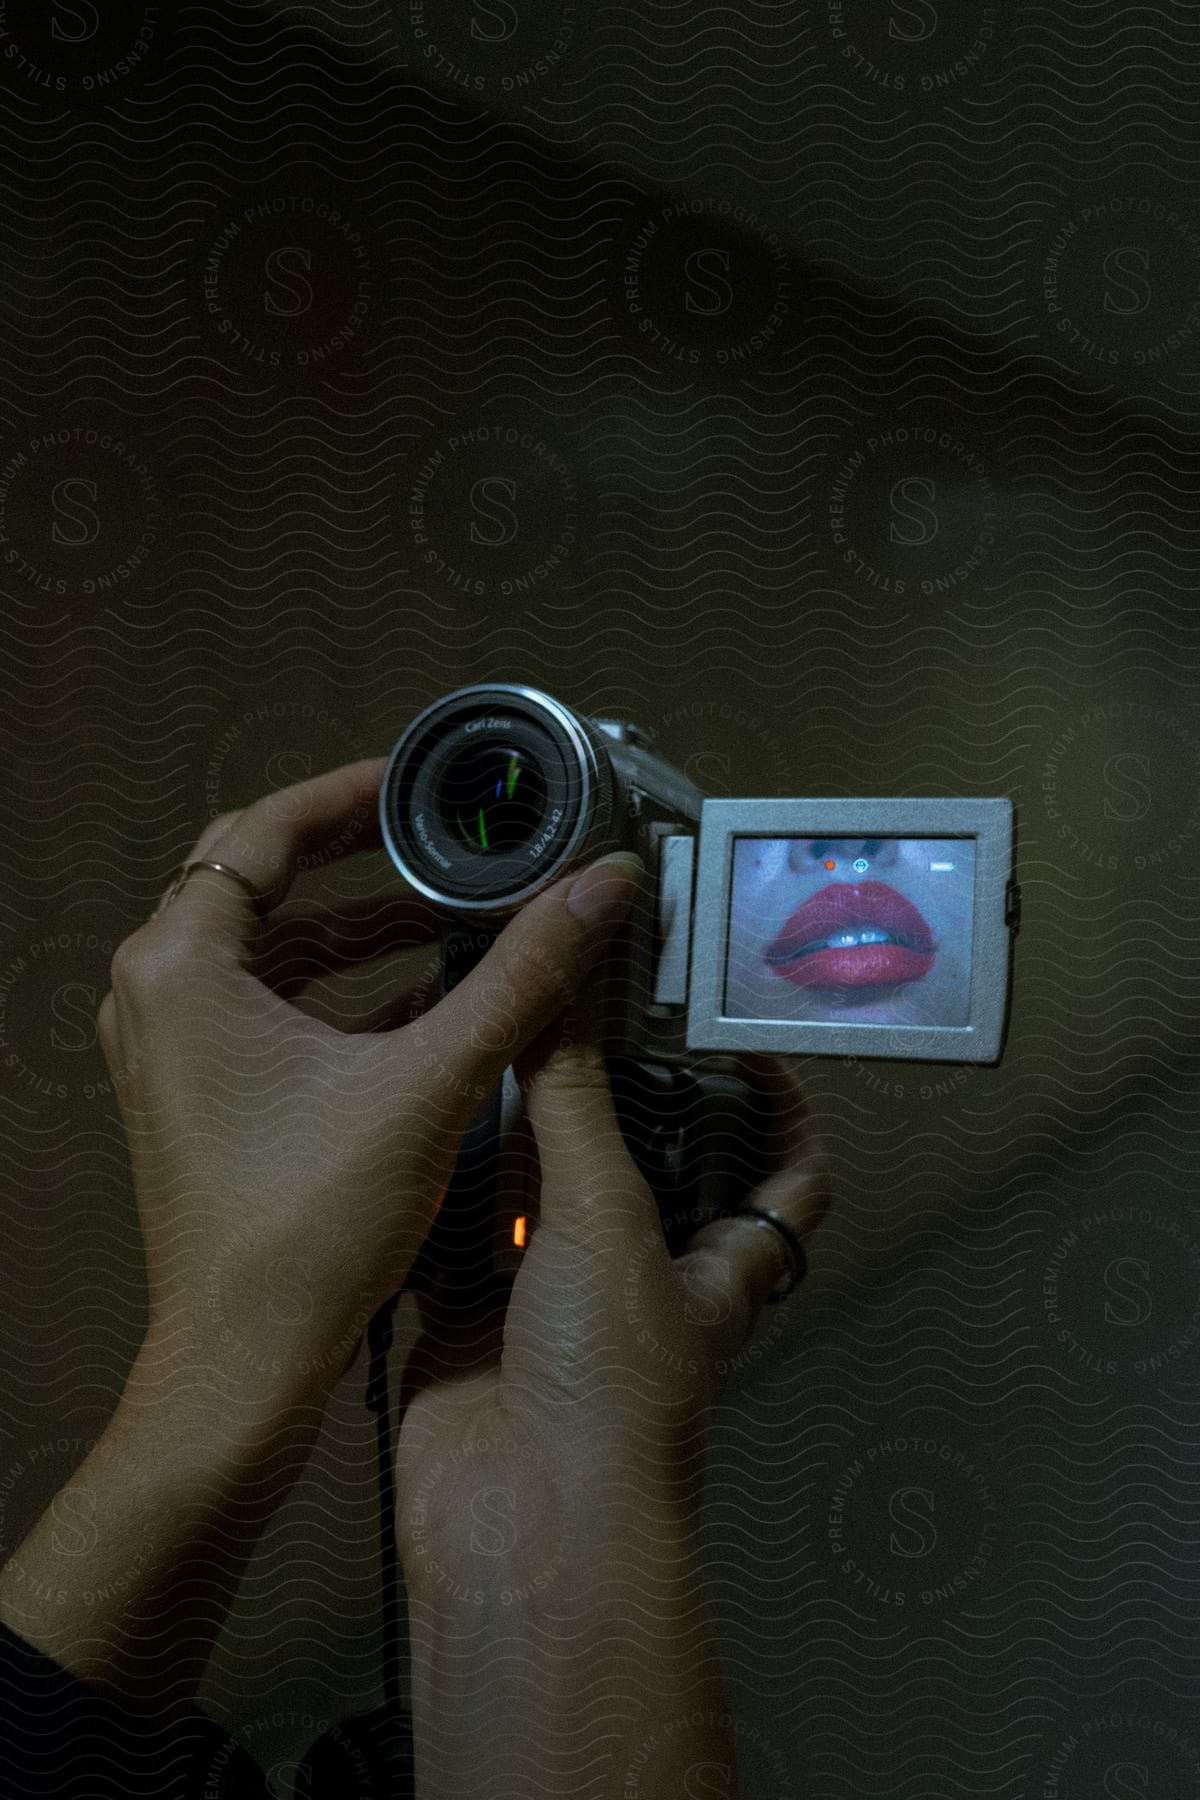 A woman holding a camcorder with red lipstick on her lips